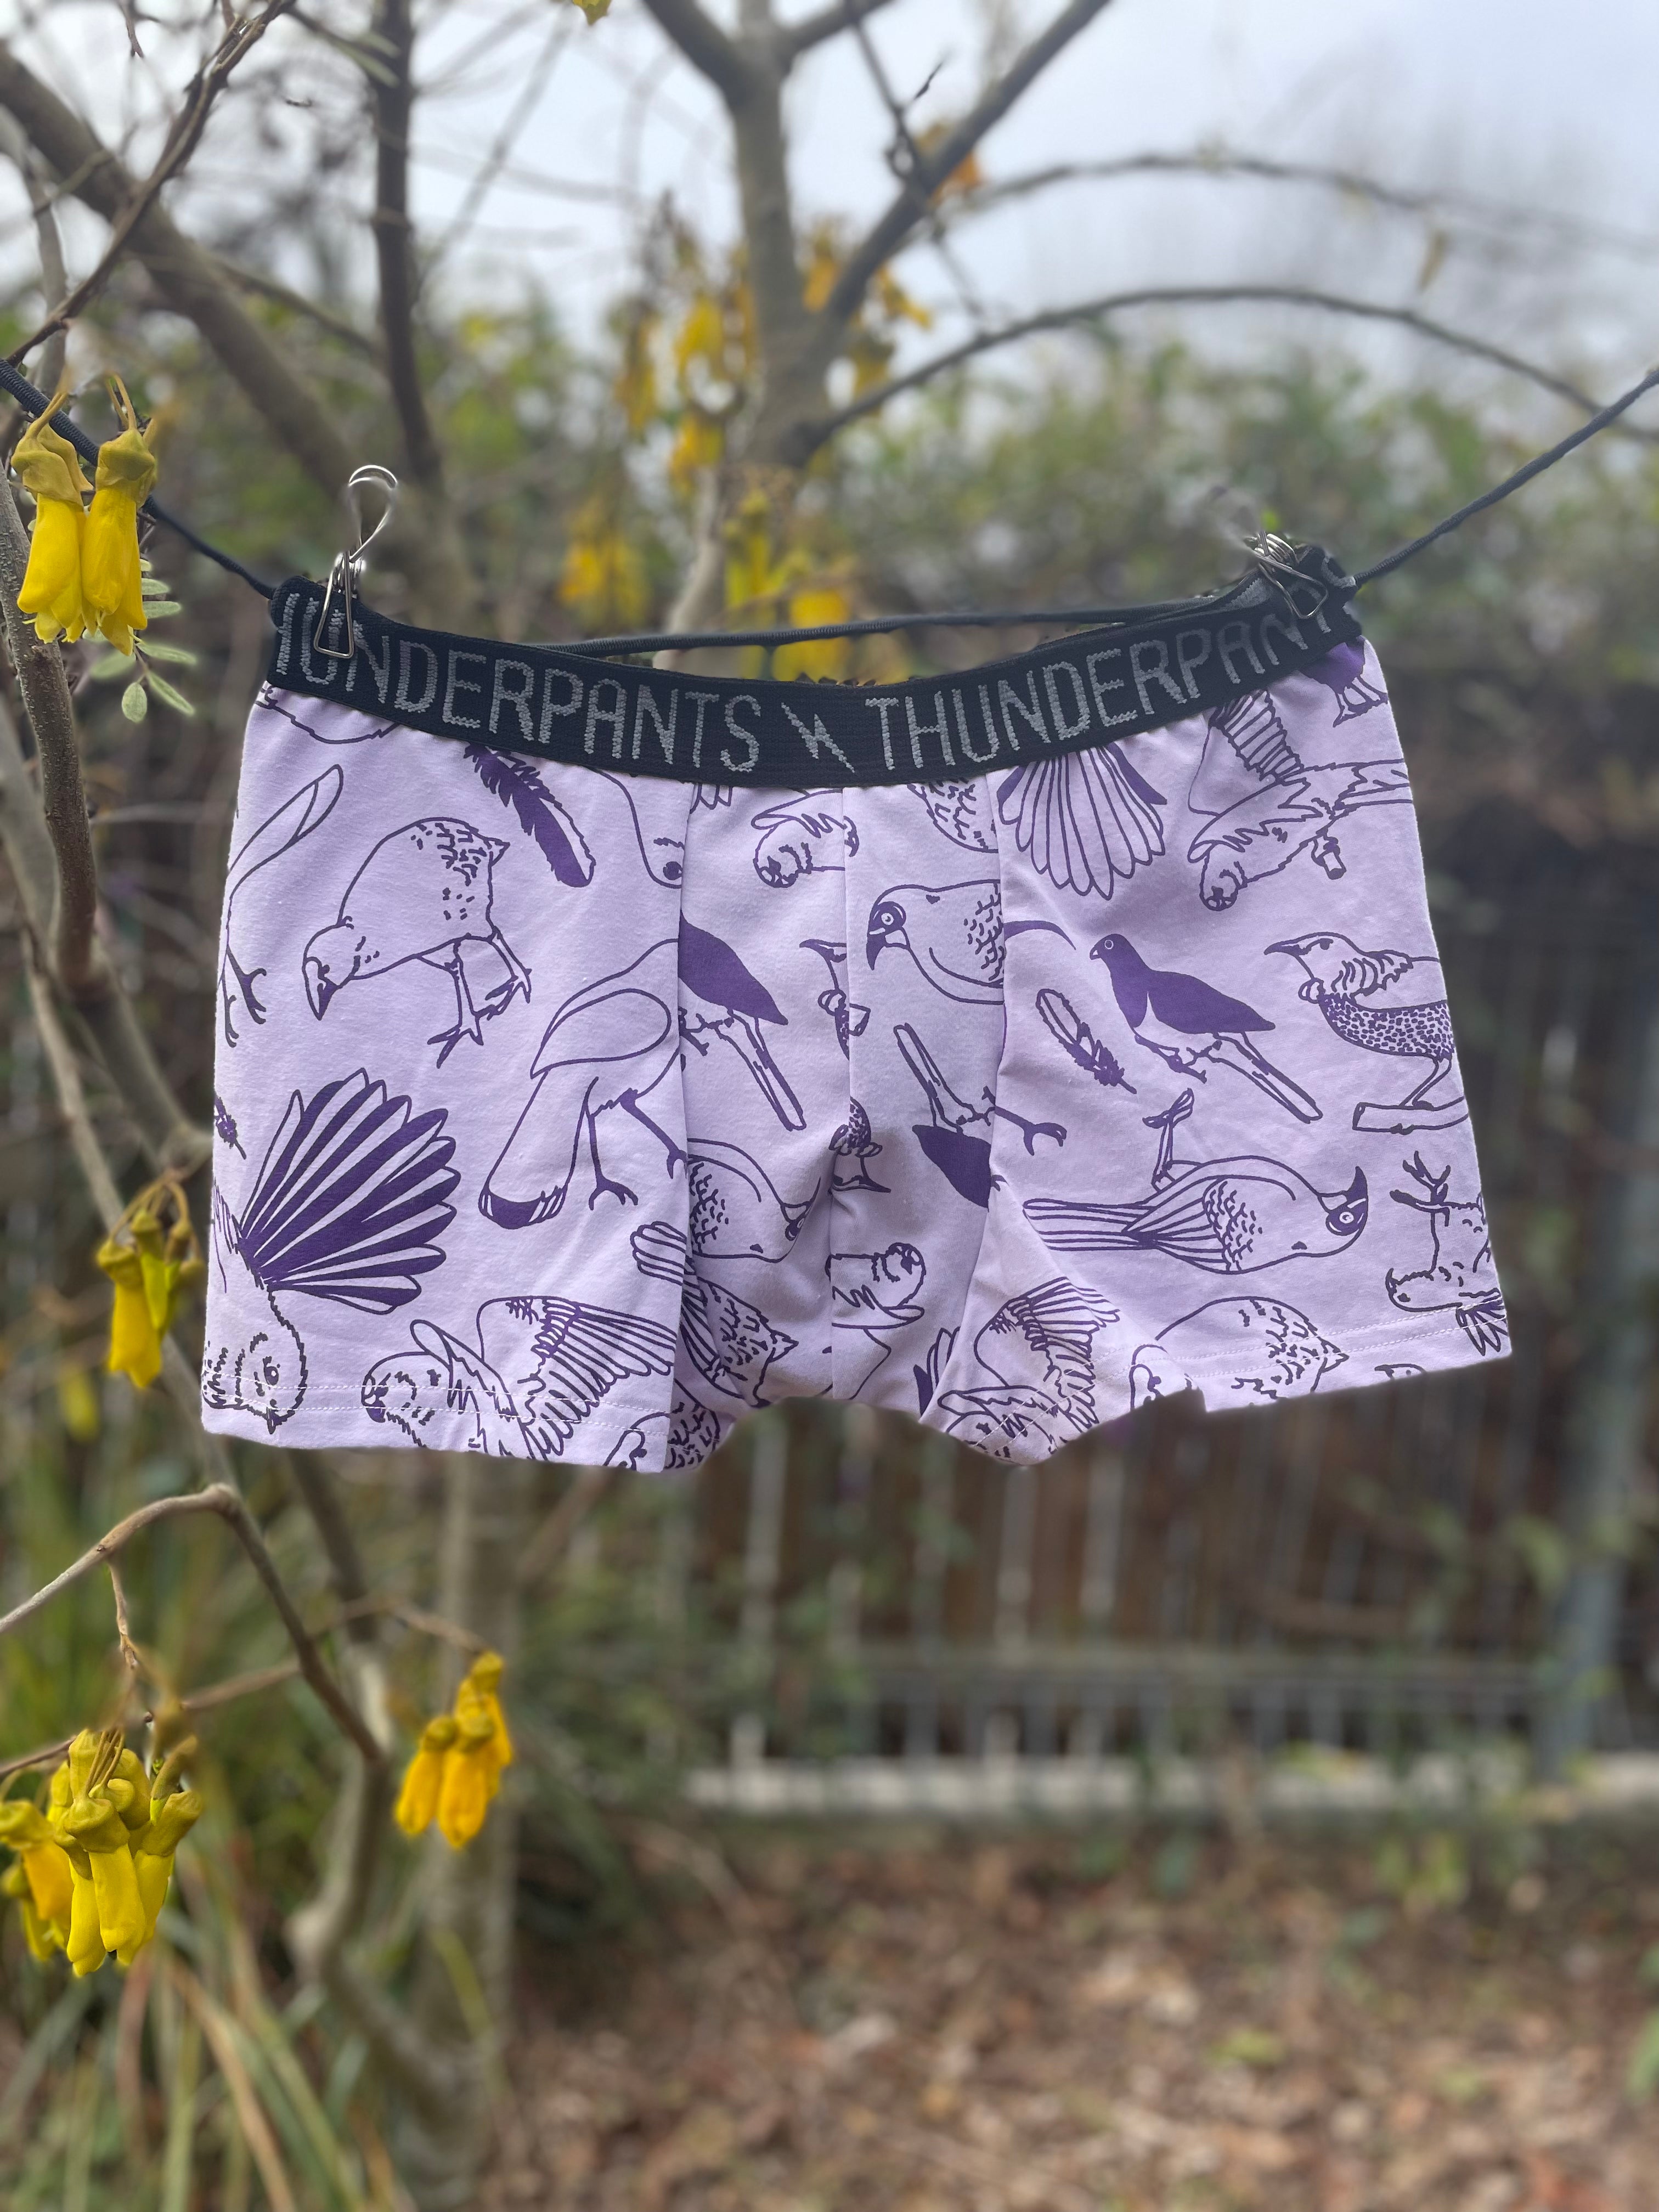 Pouch Boxer Thunderdogs – Thunderpants NZ